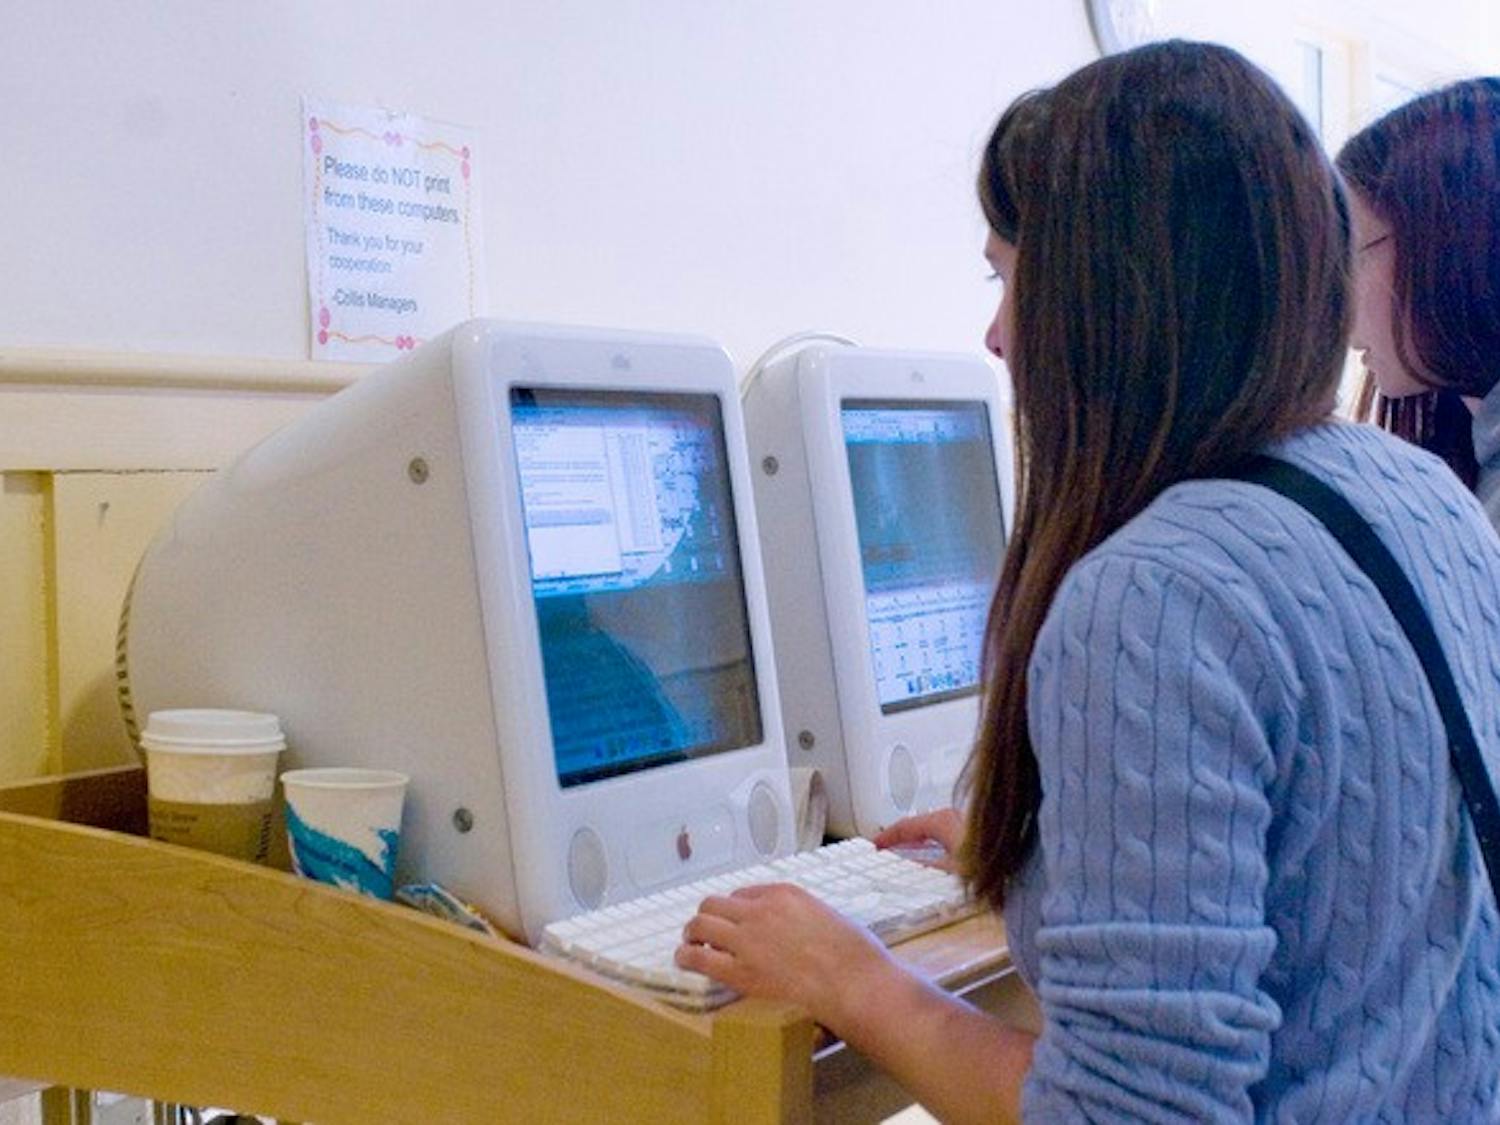 Several high-traffic BlitzMail terminals were down as classes started, resulting in long lines for e-mail.